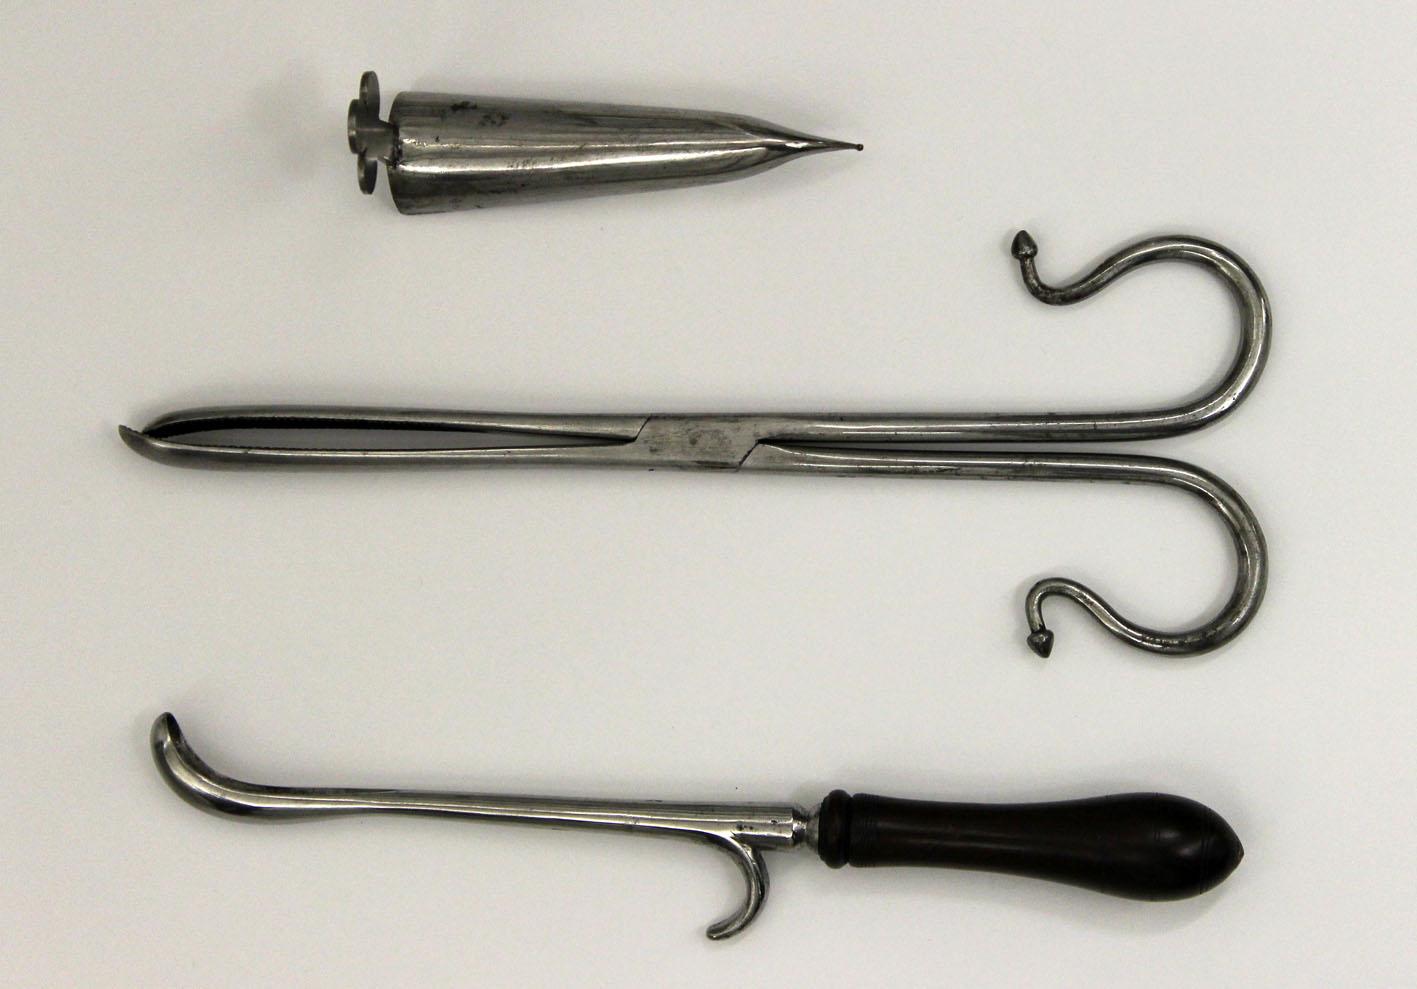 Surgical instruments for the removal of a bladder stone, about 1650 (Royal College of Physicians)